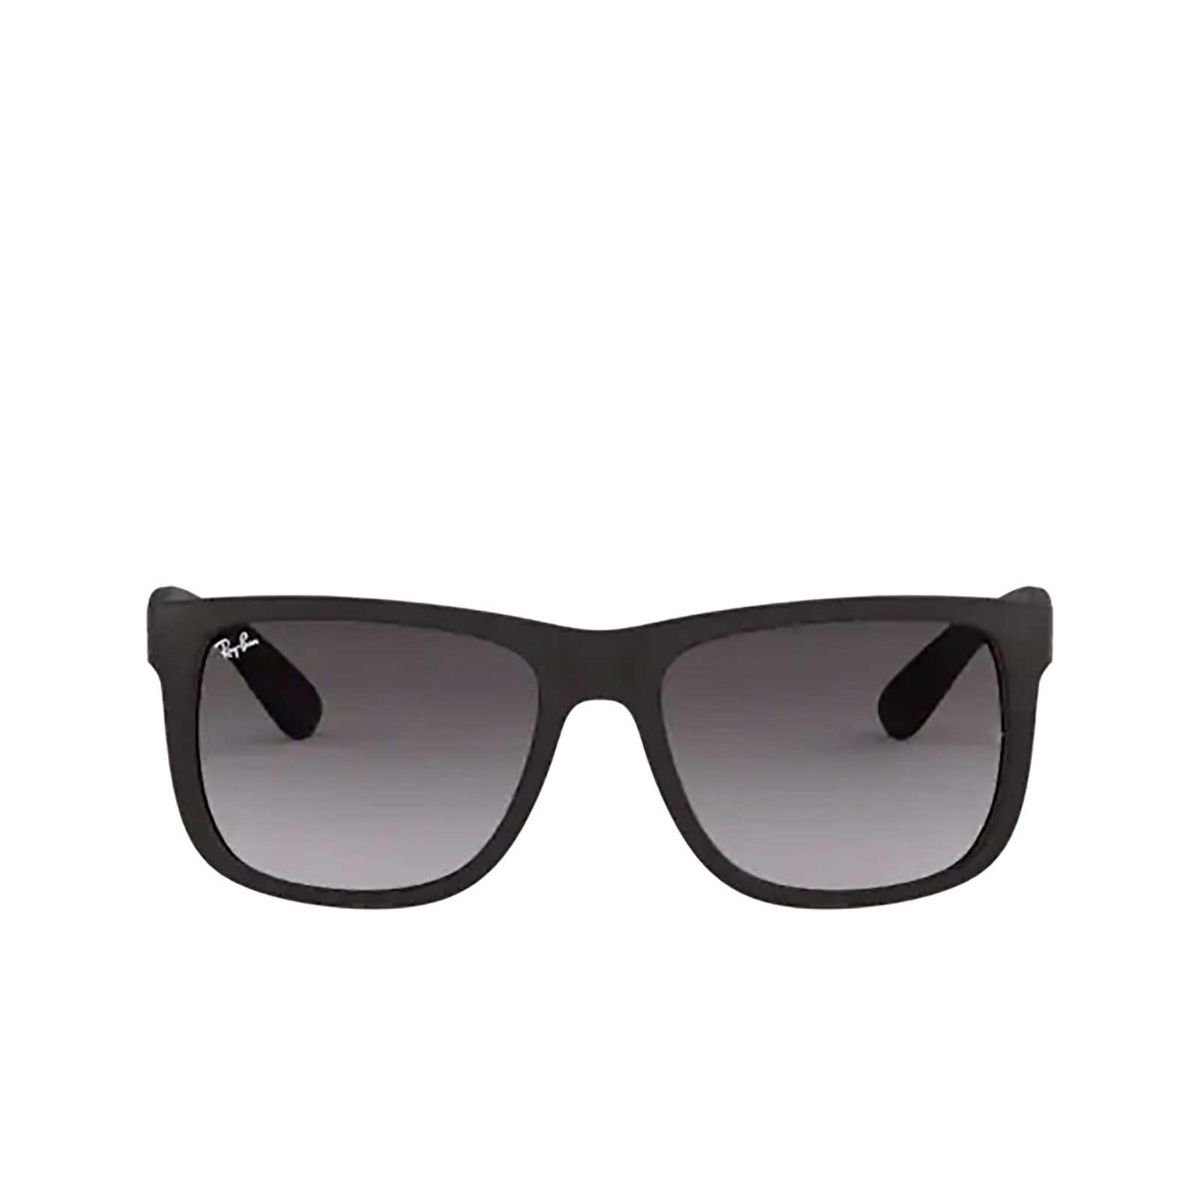 Ray-Ban JUSTIN Sunglasses 601/8G Rubber Black - front view